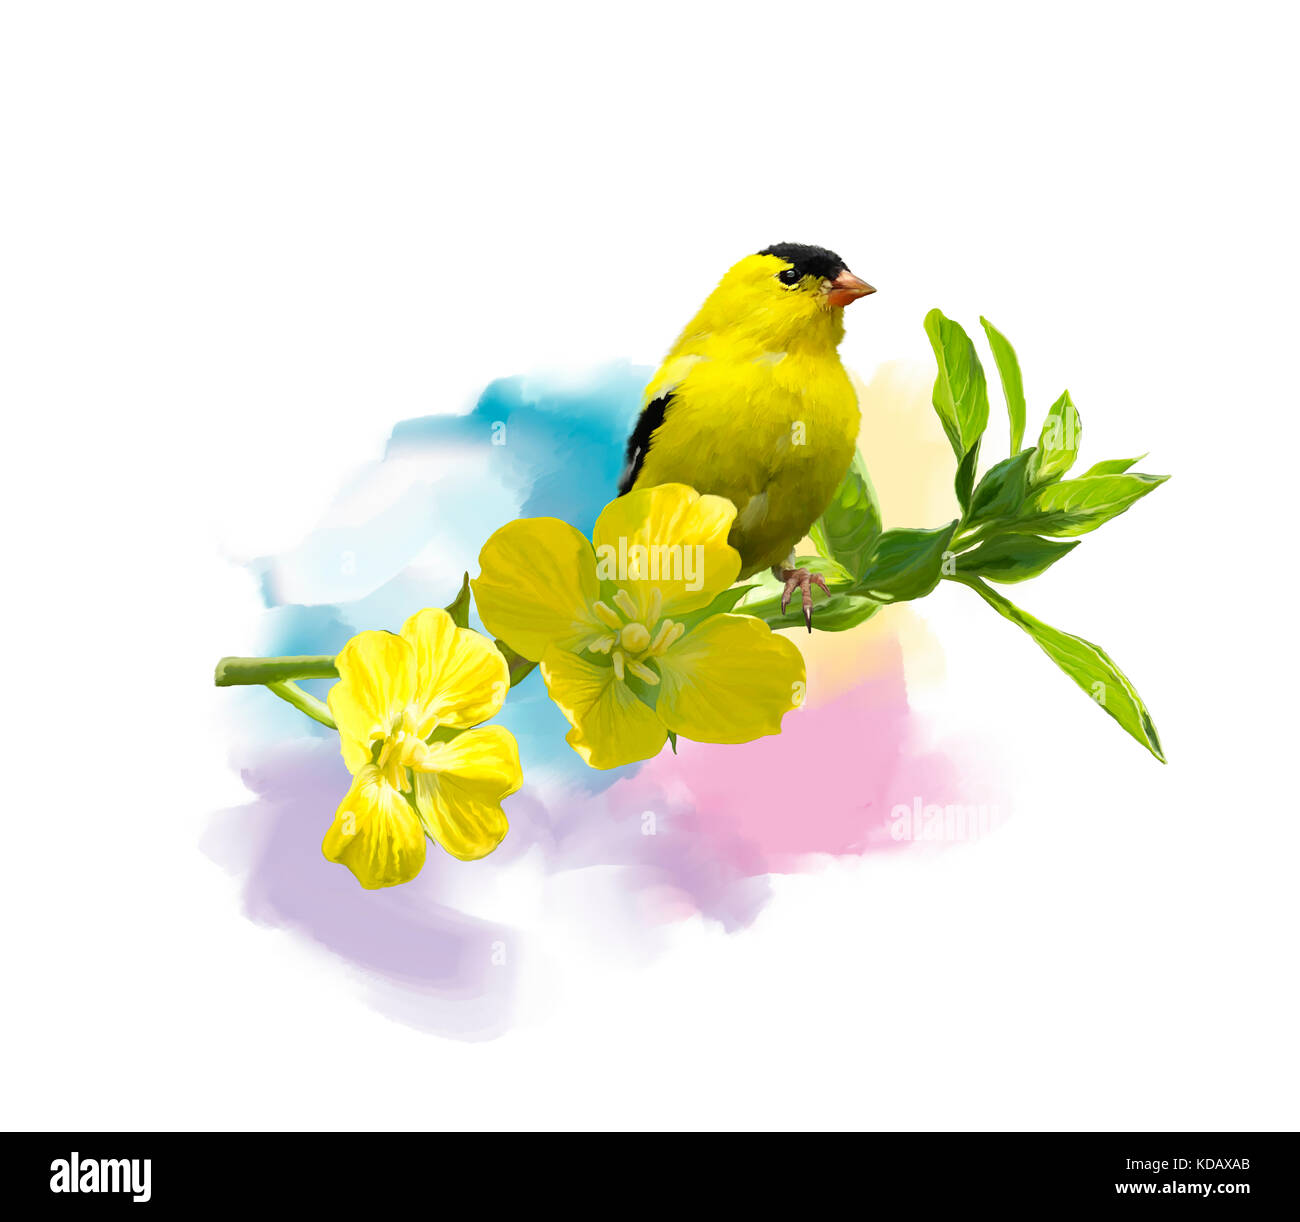 Digital Painting of  American Goldfinch with the yellow flowers Stock Photo